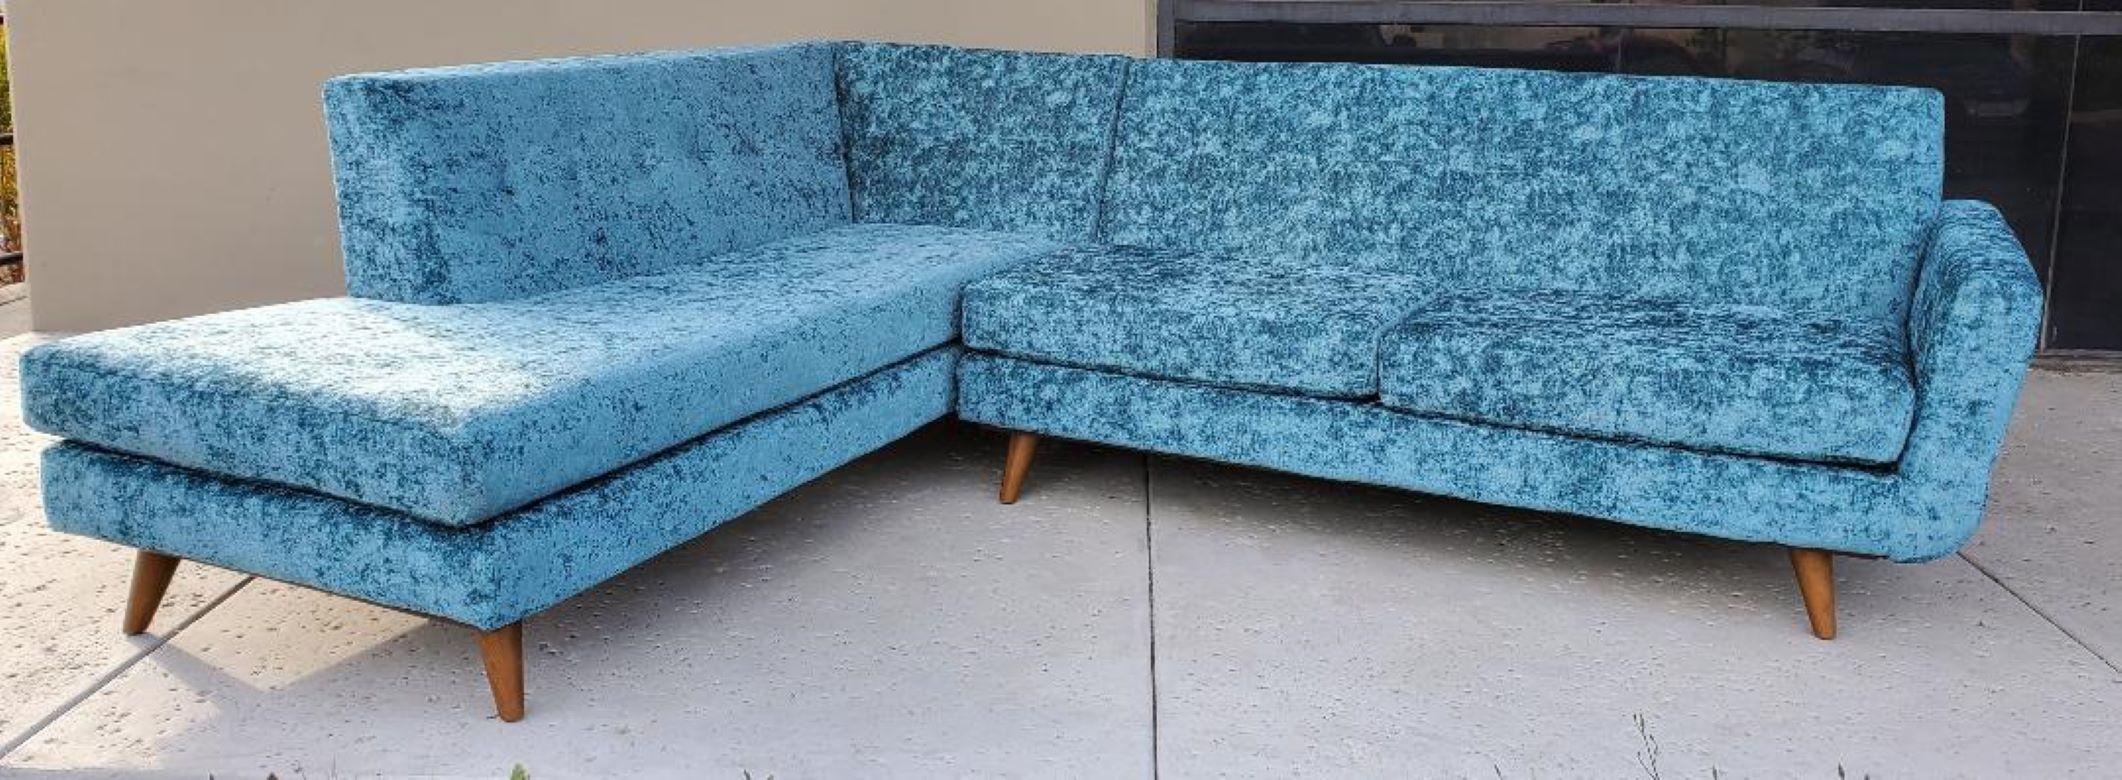 1960s Low Slung Style Sectional With Thick Wooden Tapered Legs And Aqua Green Crushed Velvet Upholstery.
This Is A Gorgeous Aqua Green Velvet Upholstered 2 Piece Streamline Style Sofa, Which Represents The Comfort, The Style And The Iconic Dramatic